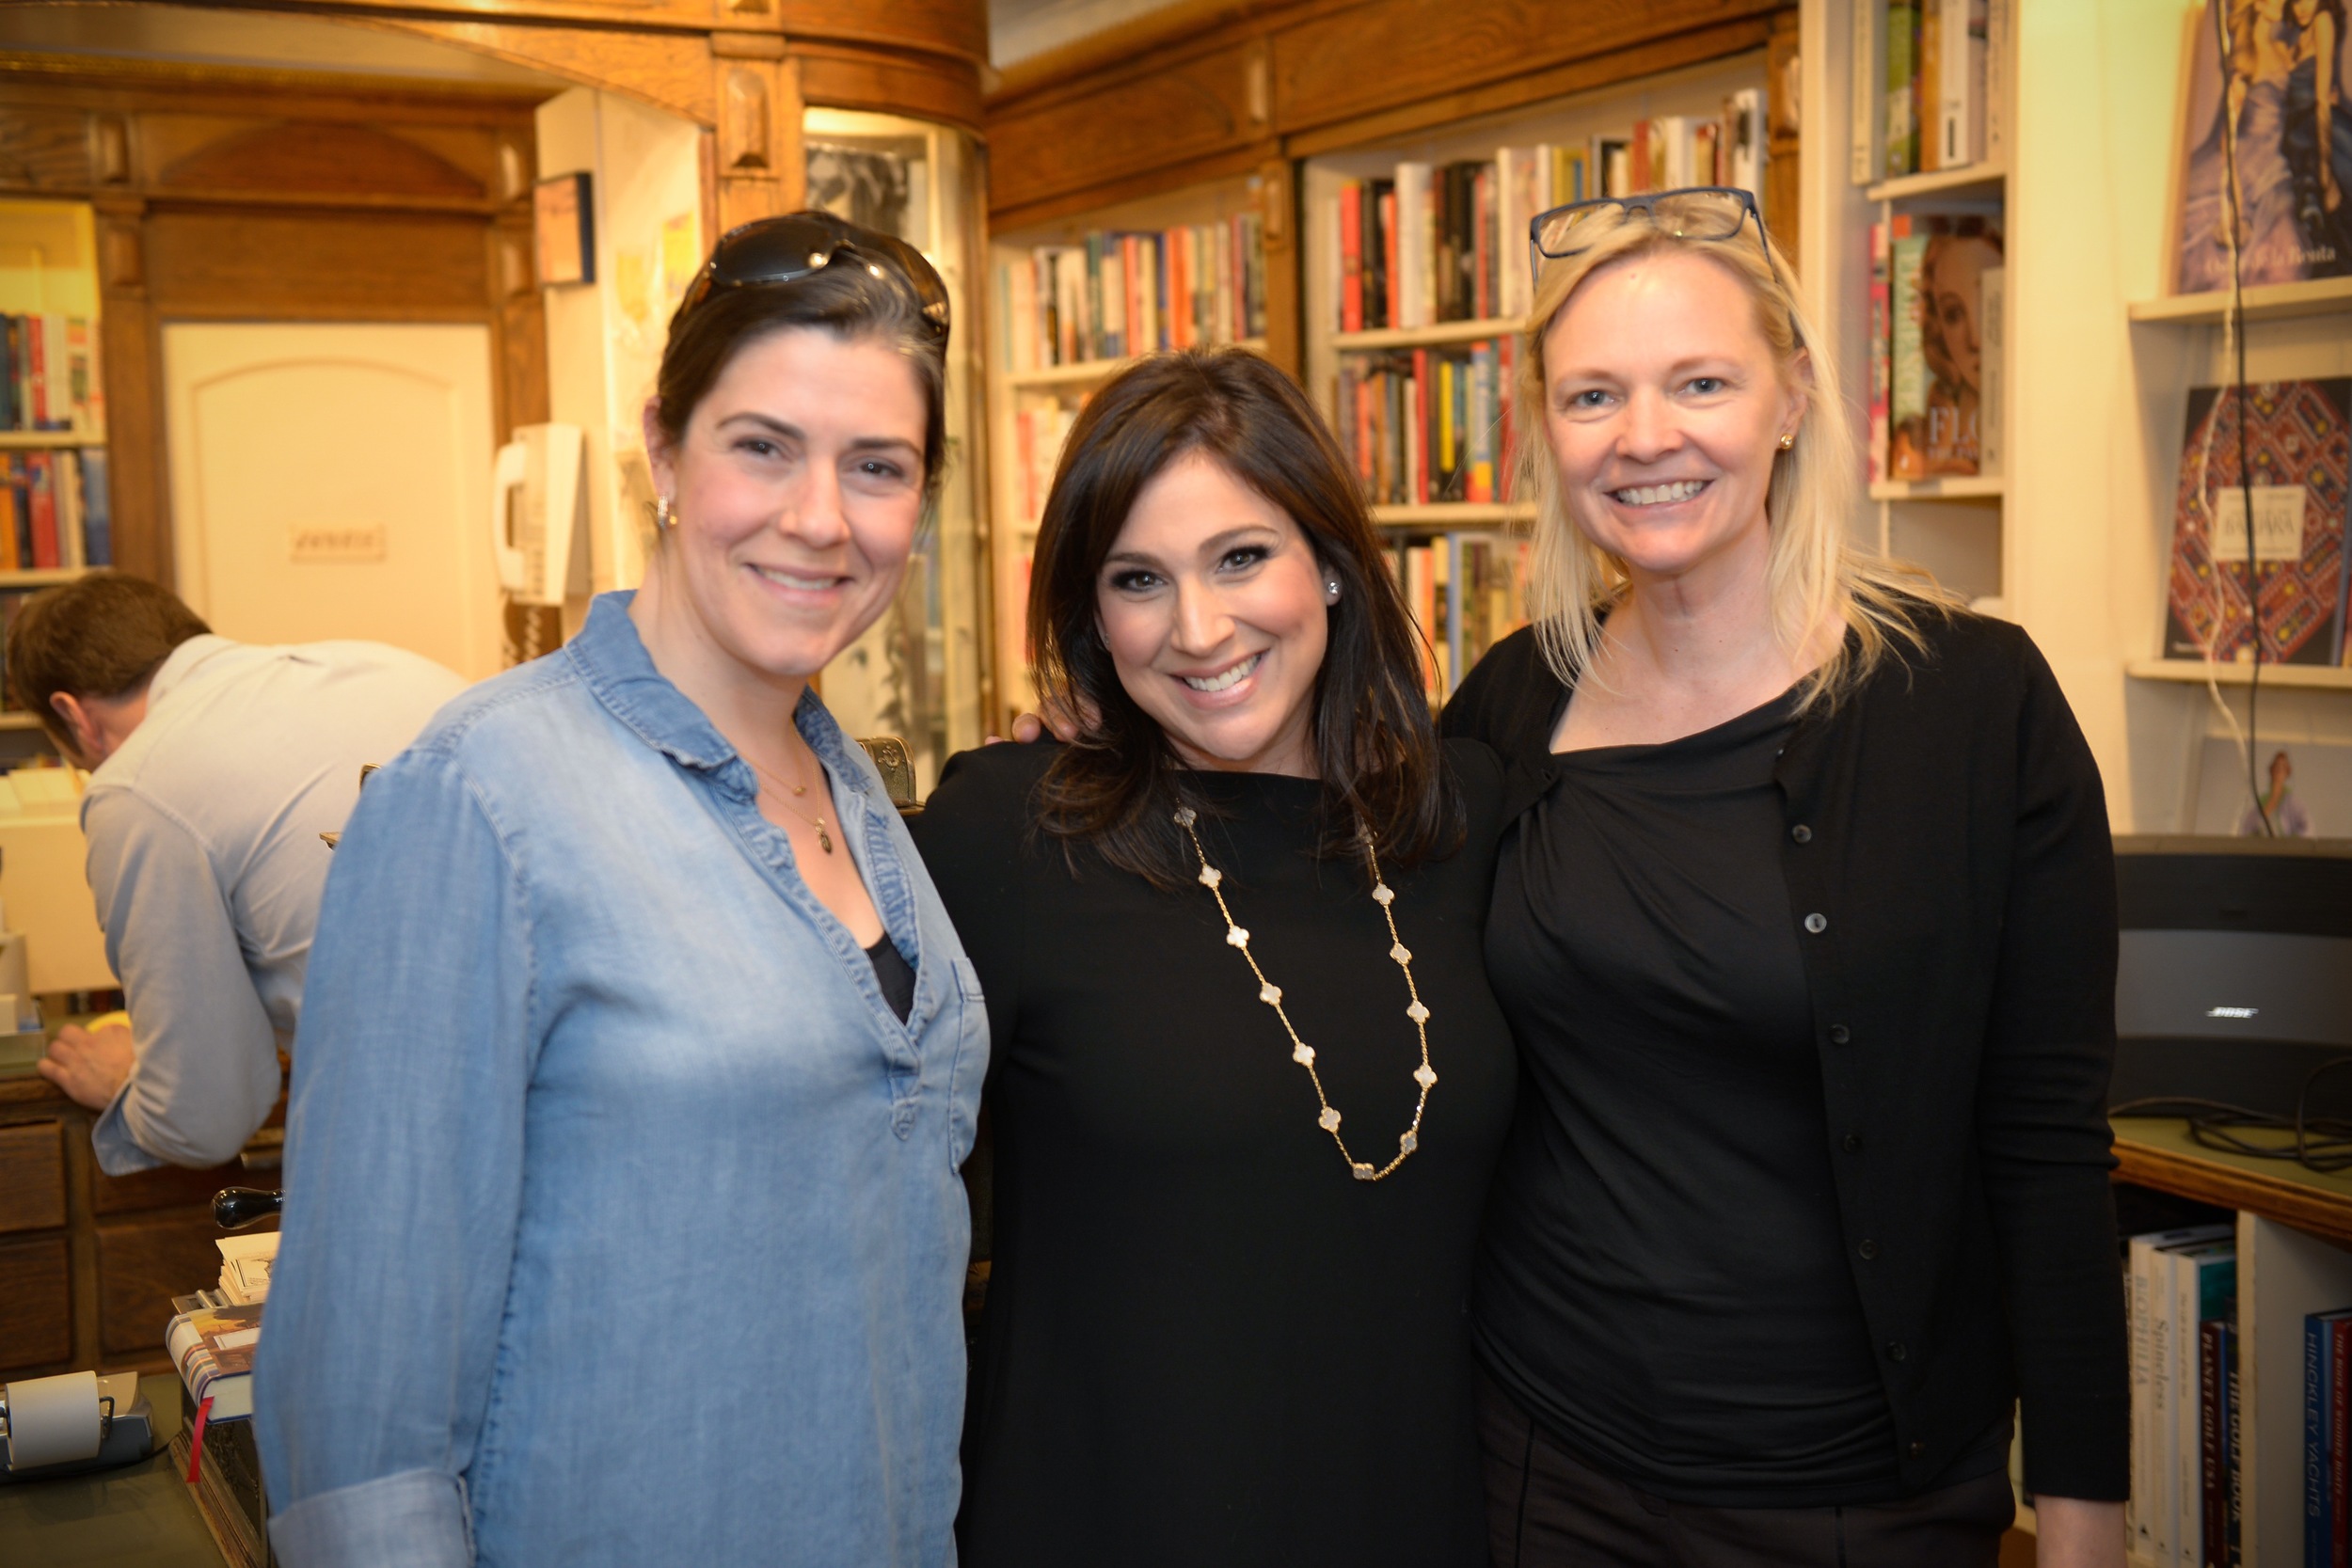 With editor Kendra Harpster and author Amy Scheibe